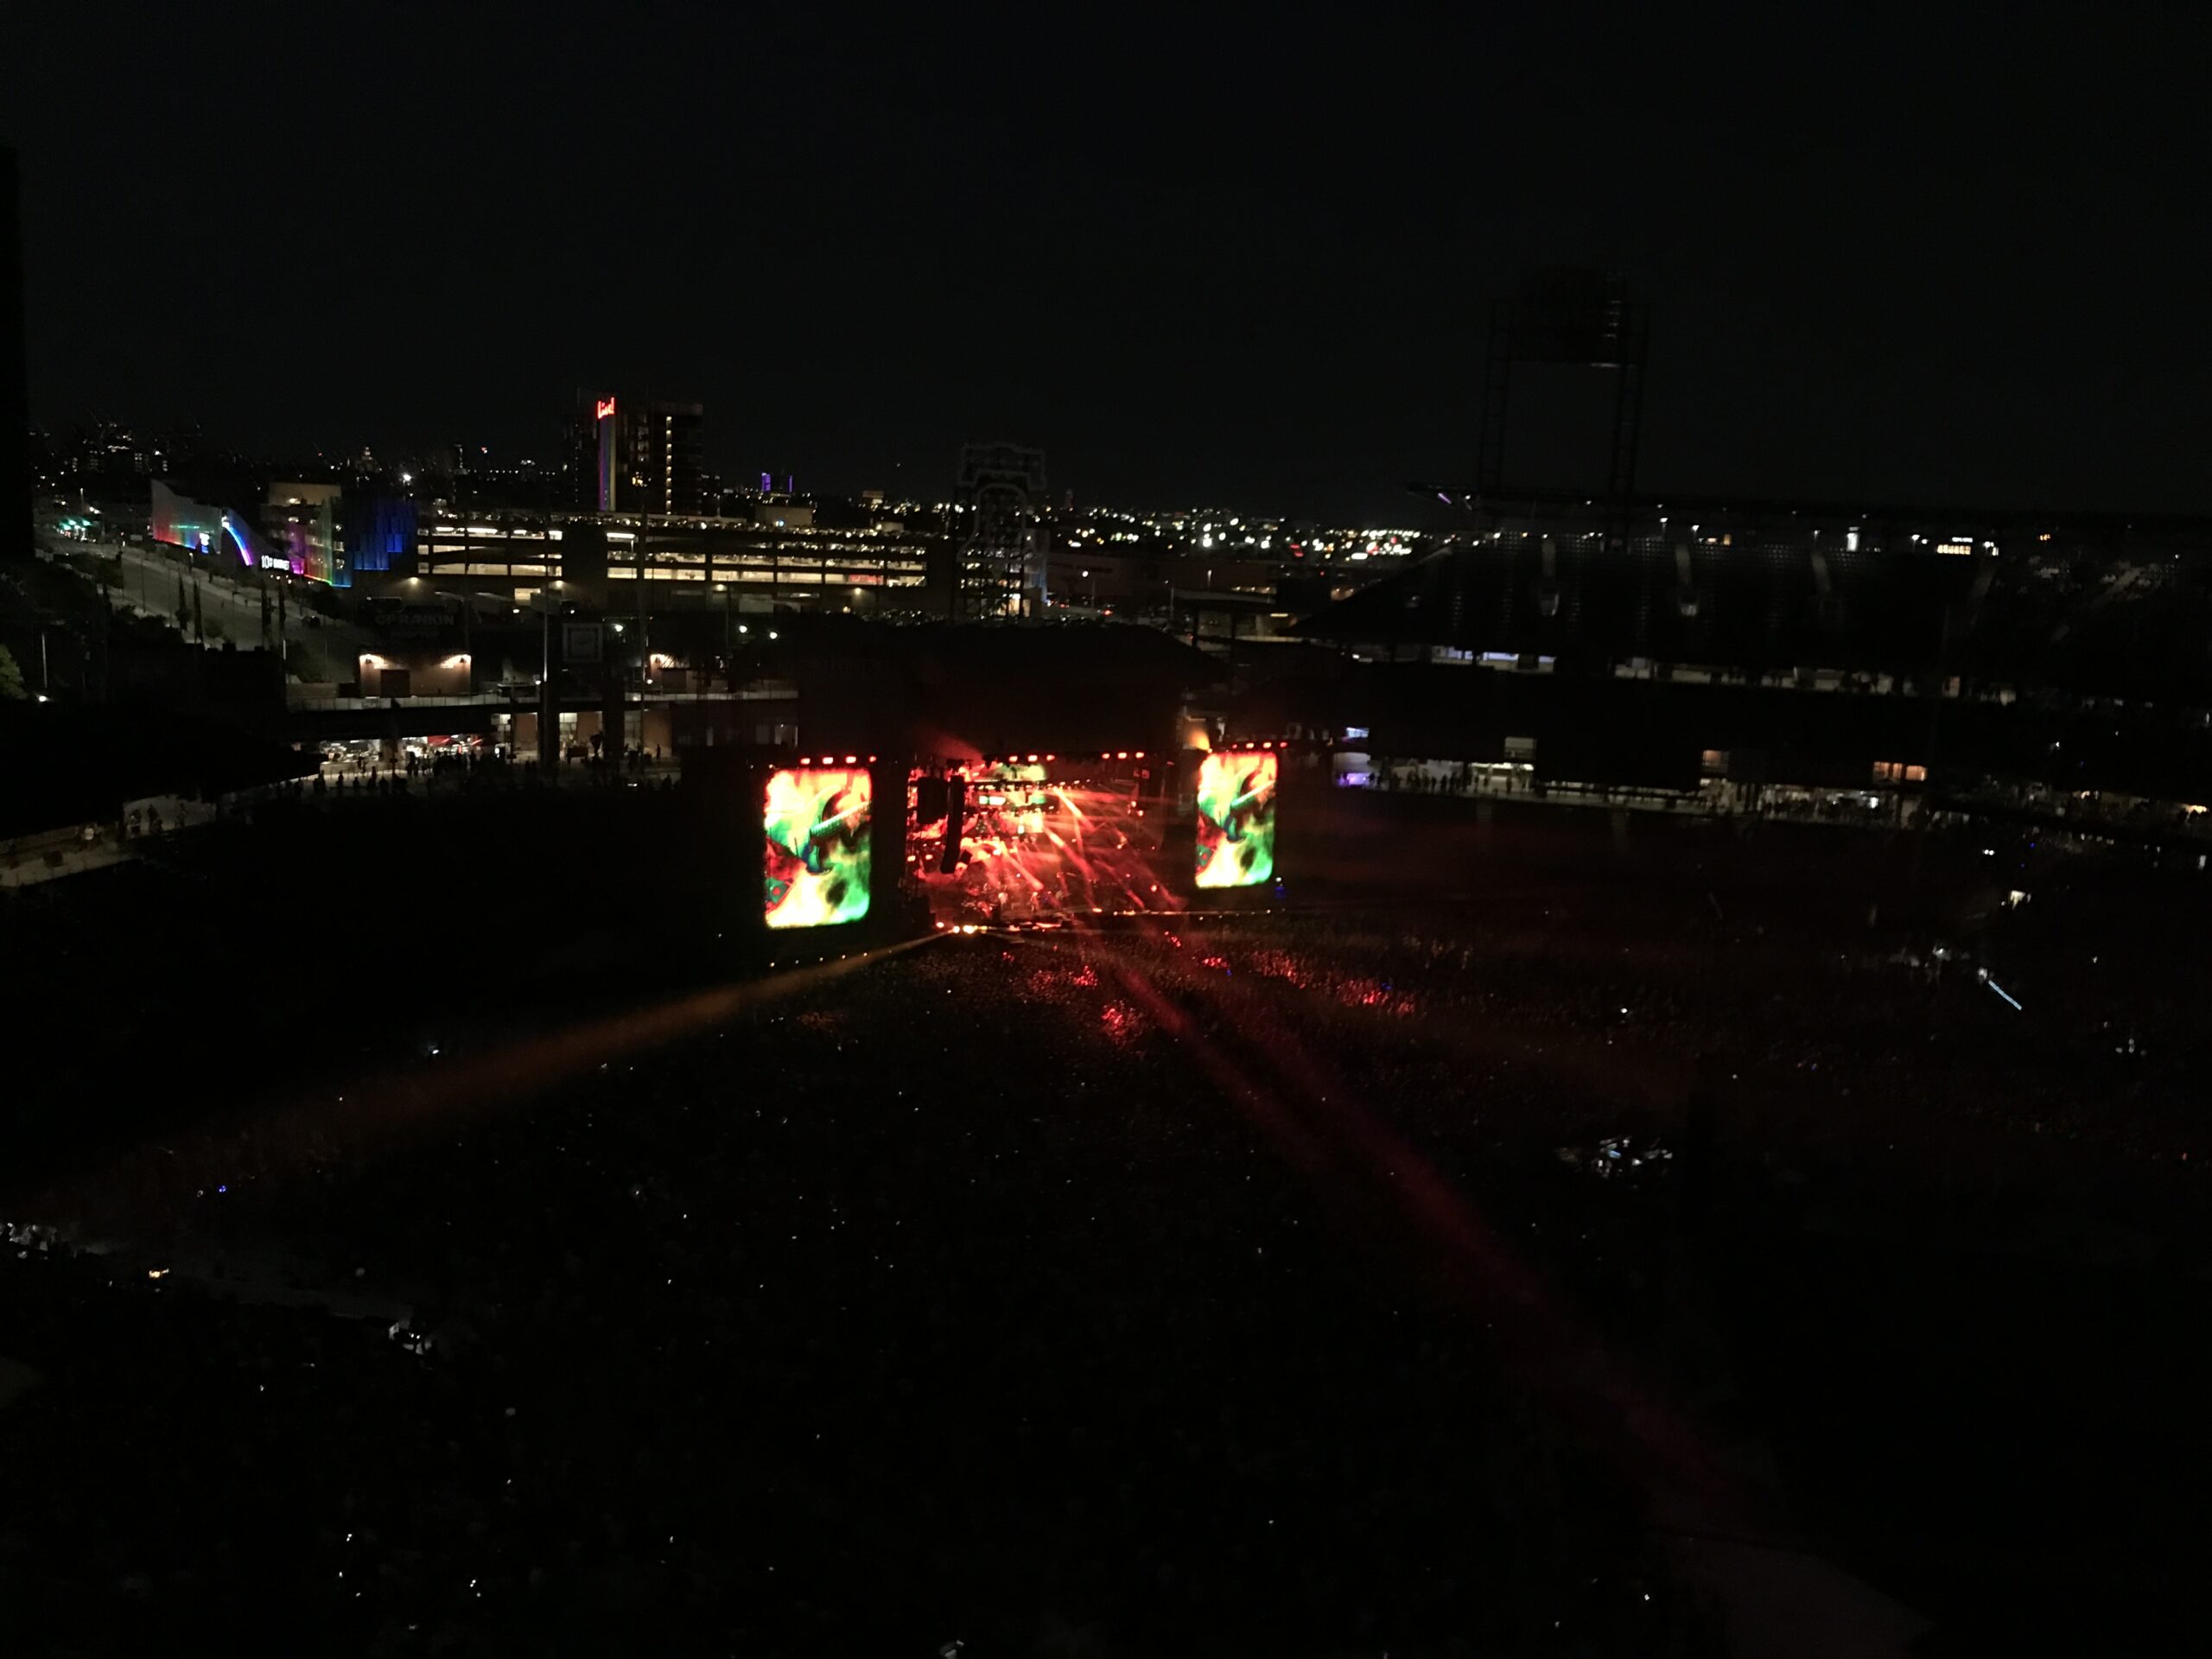 The suns sets on Dead and Company in Philadelphia